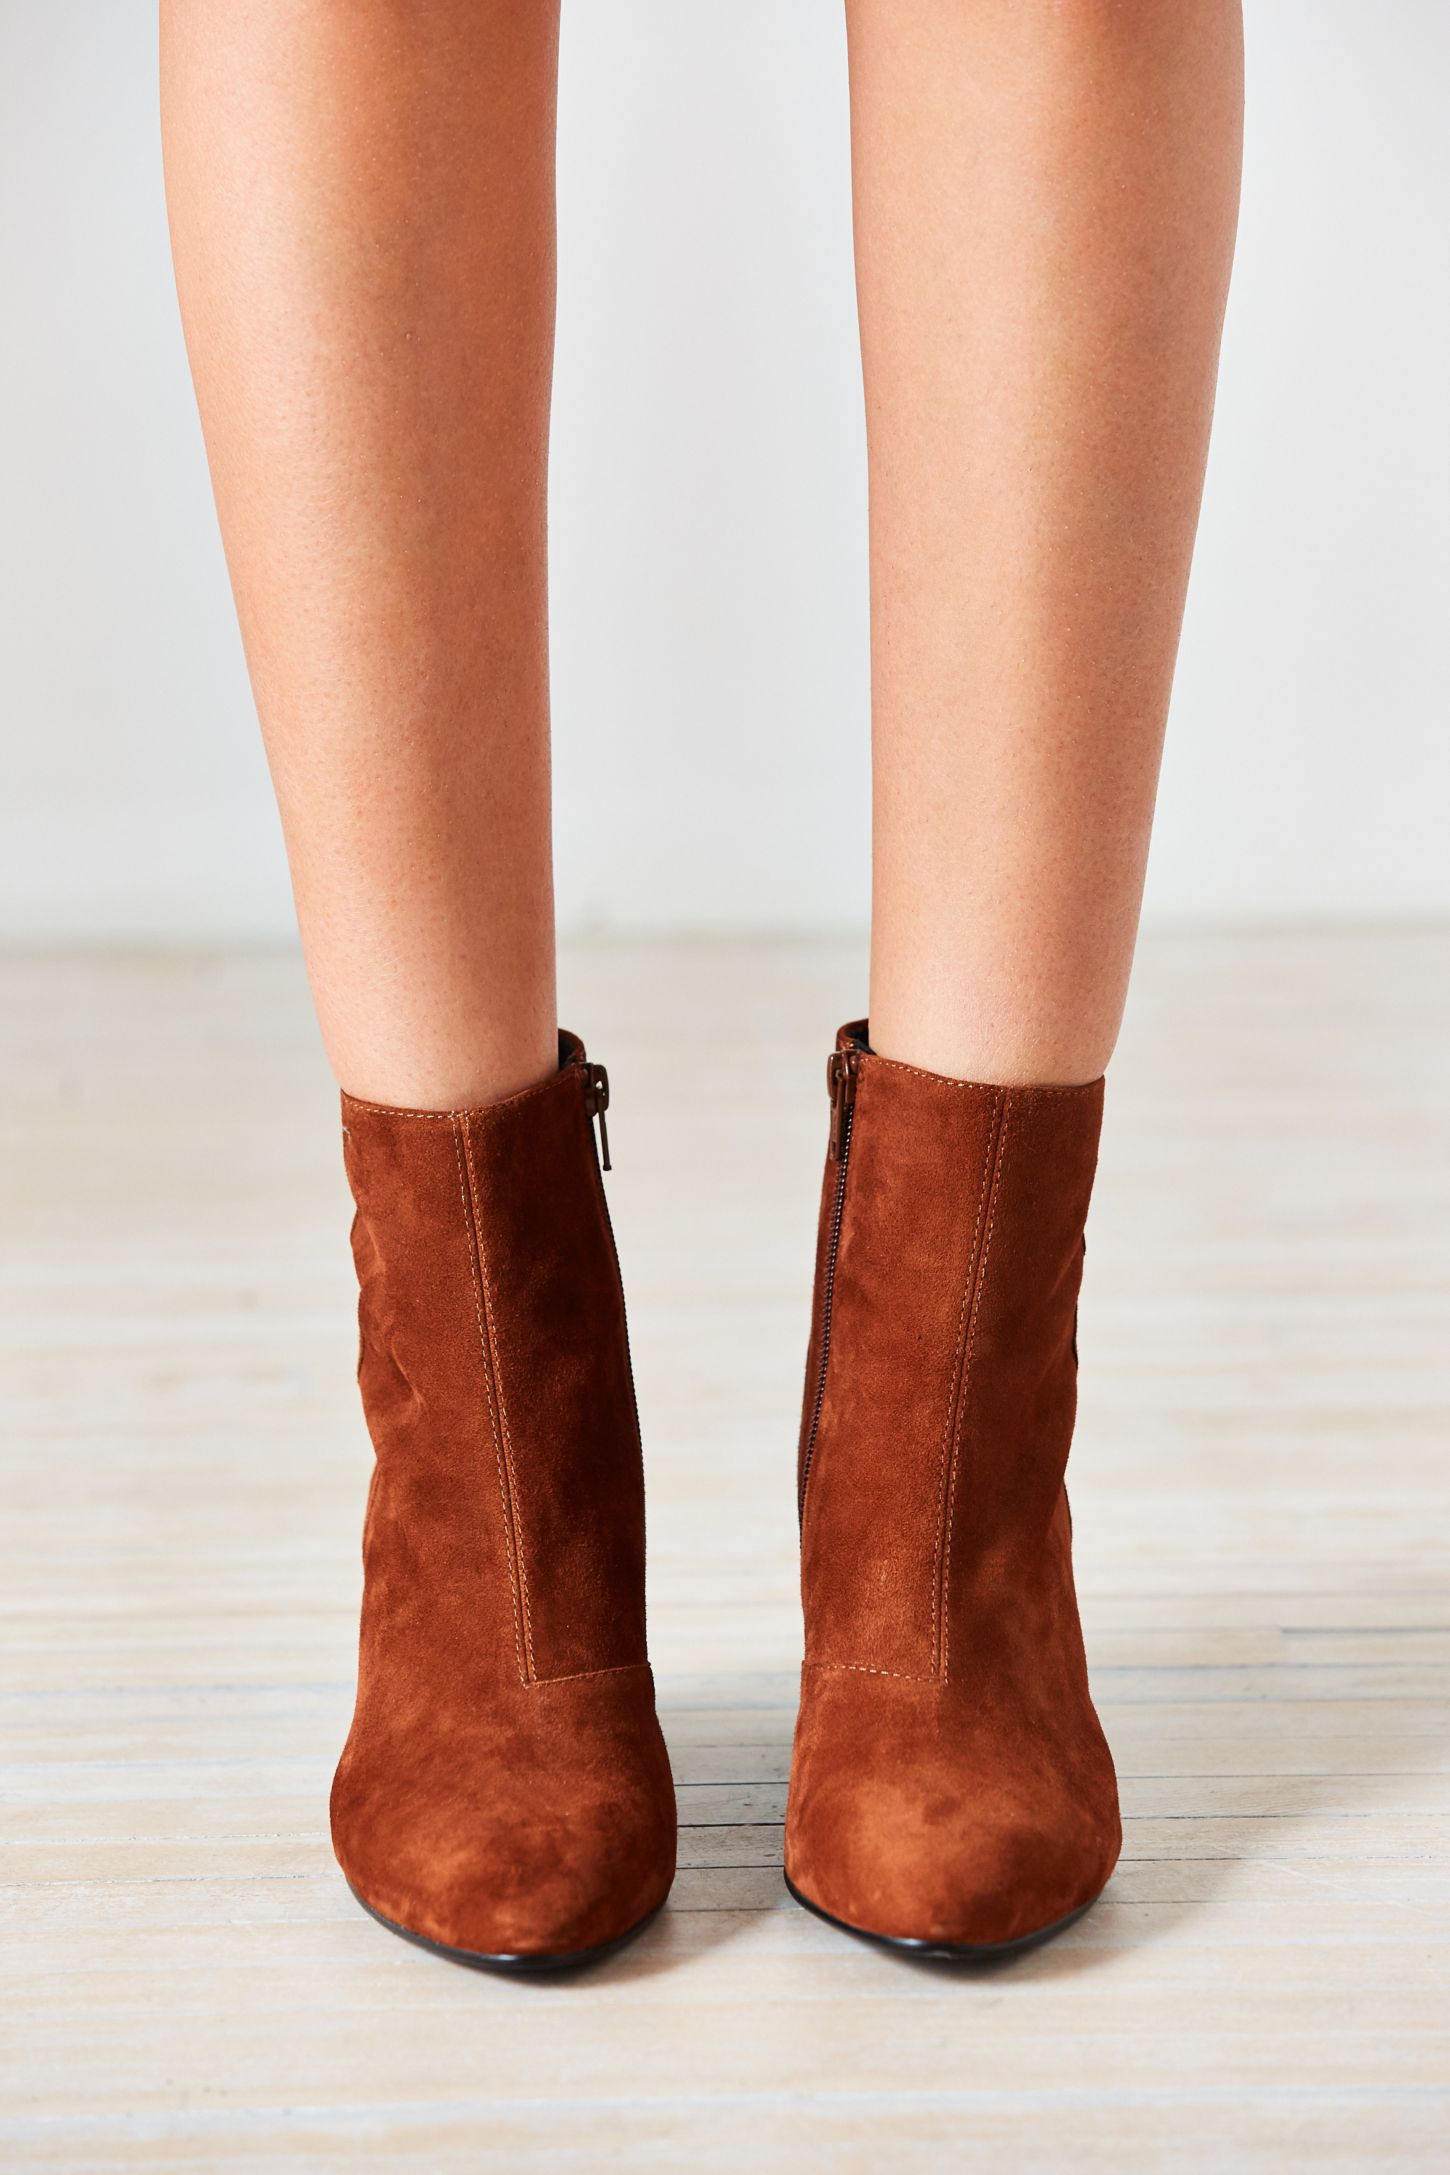 Vagabond Olivia Suede Boot | Urban Outfitters